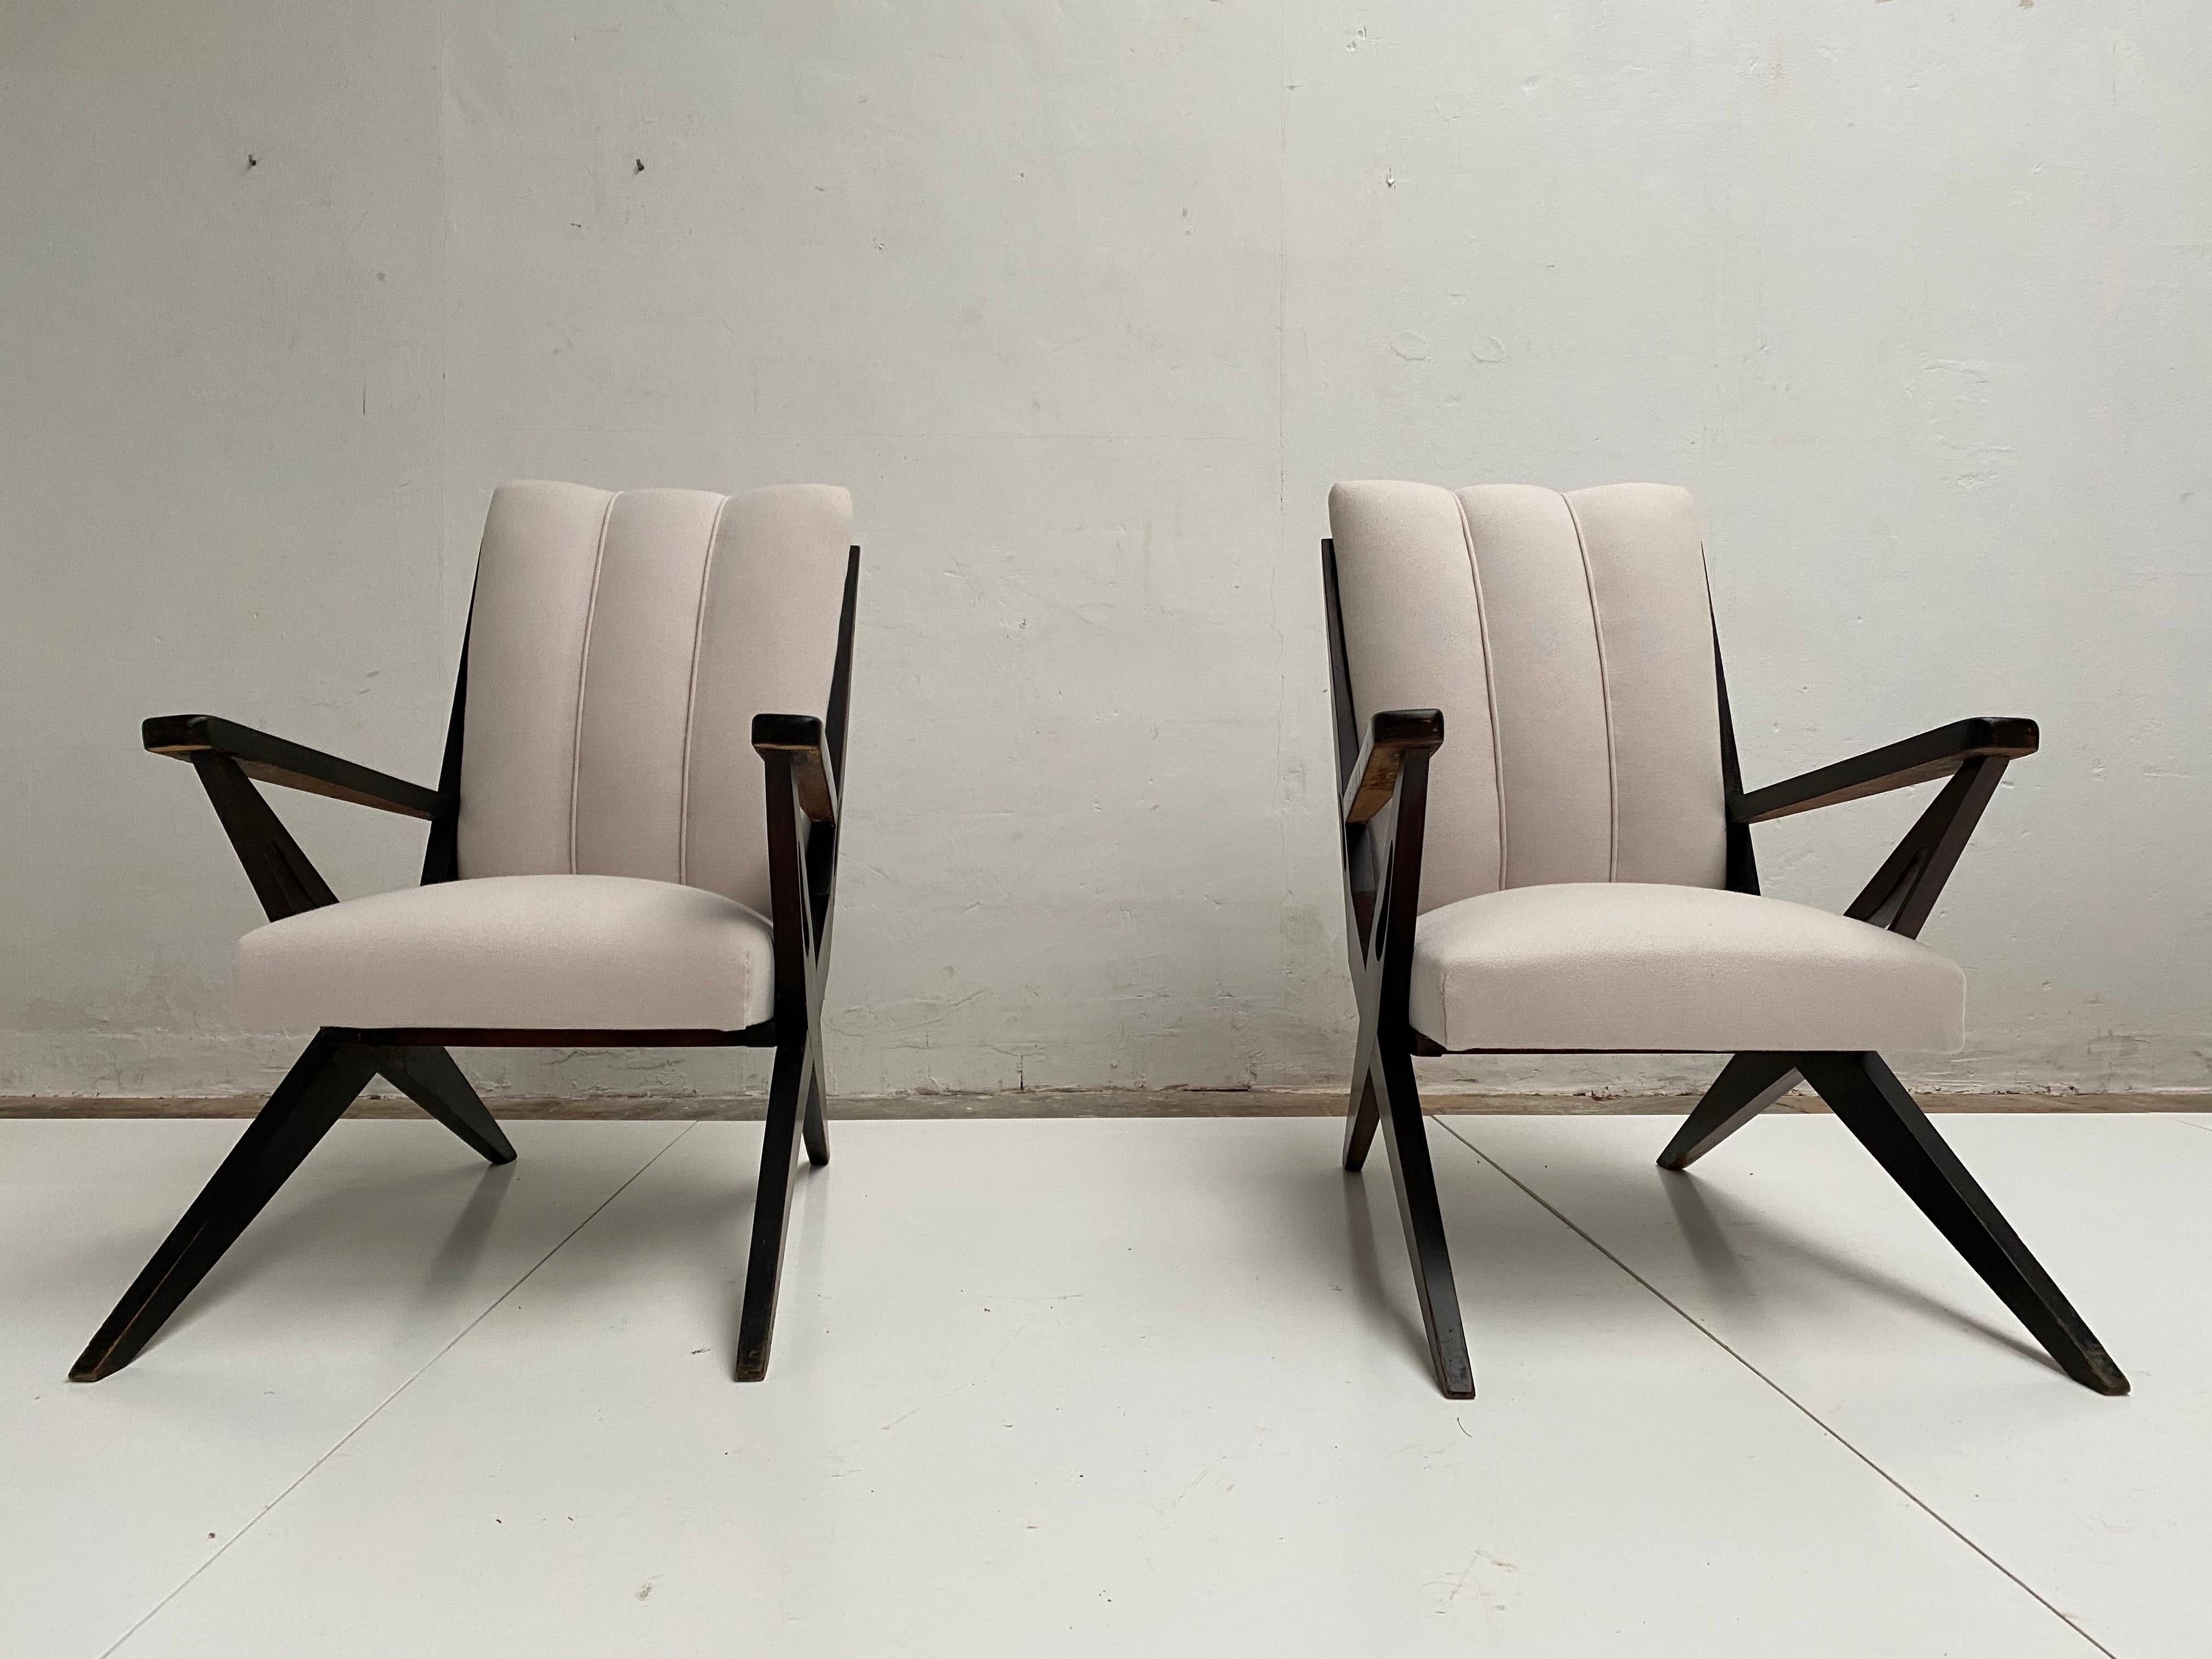 Exceptional Italian lounge chairs from the 1950s period. 

In all our experience in the field of Italian design and applied arts we have never come across this particular model before. 

The scissor form legs initially remind us of Pierre